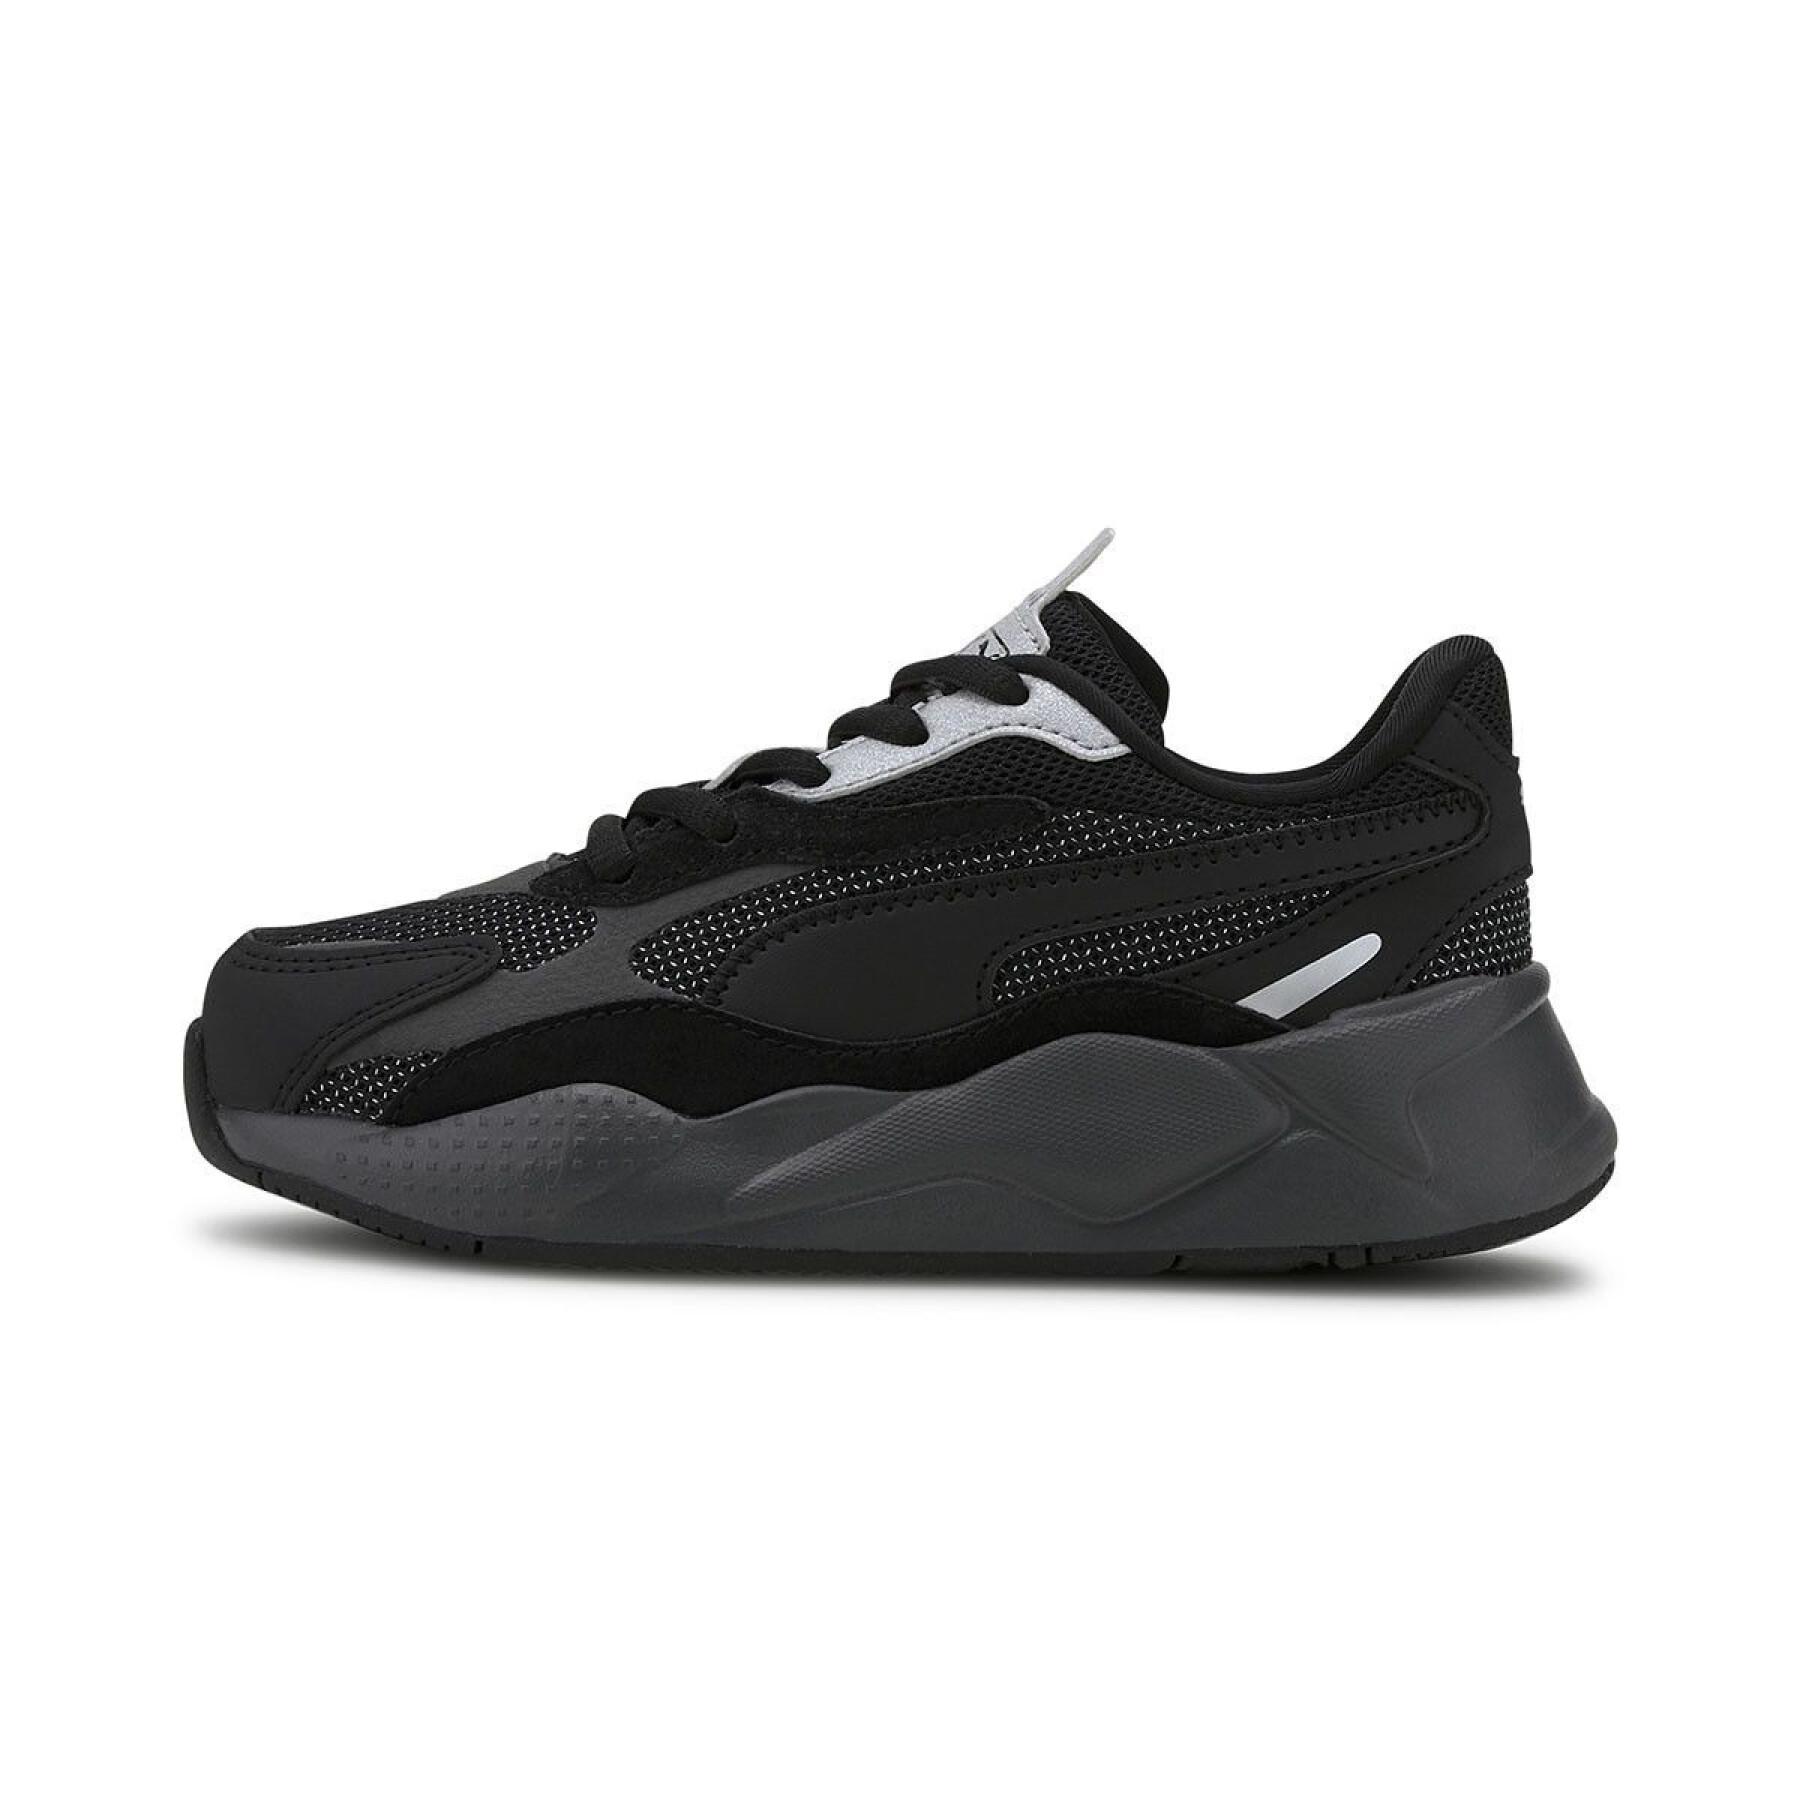 Children's sneakers Puma Rs-X³ puzzleps